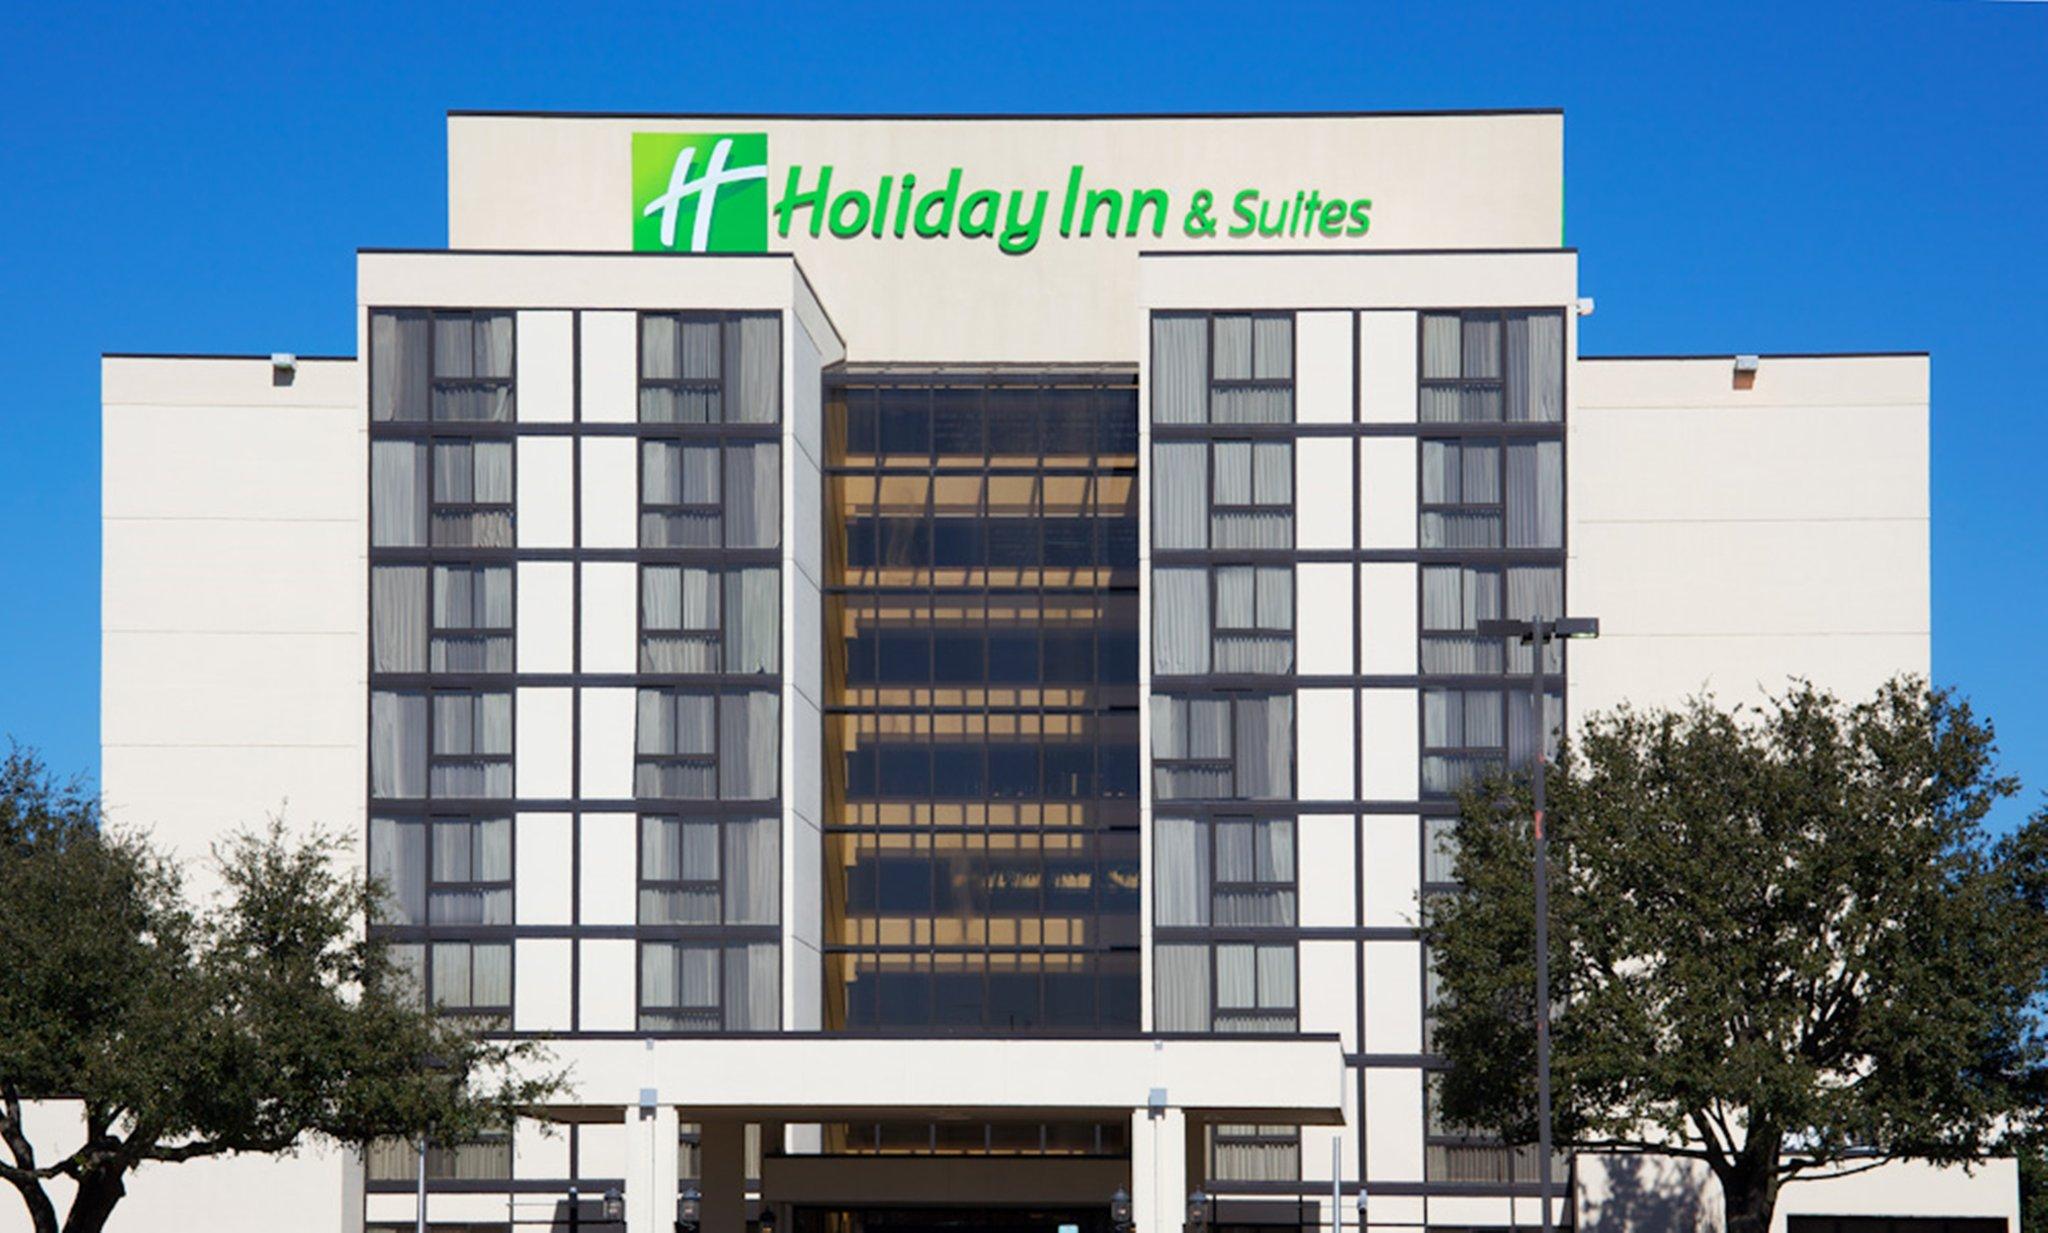 Holiday Inn Hotel & Suites Beaumont-Plaza (I-10 & Walden) in Beaumont, TX